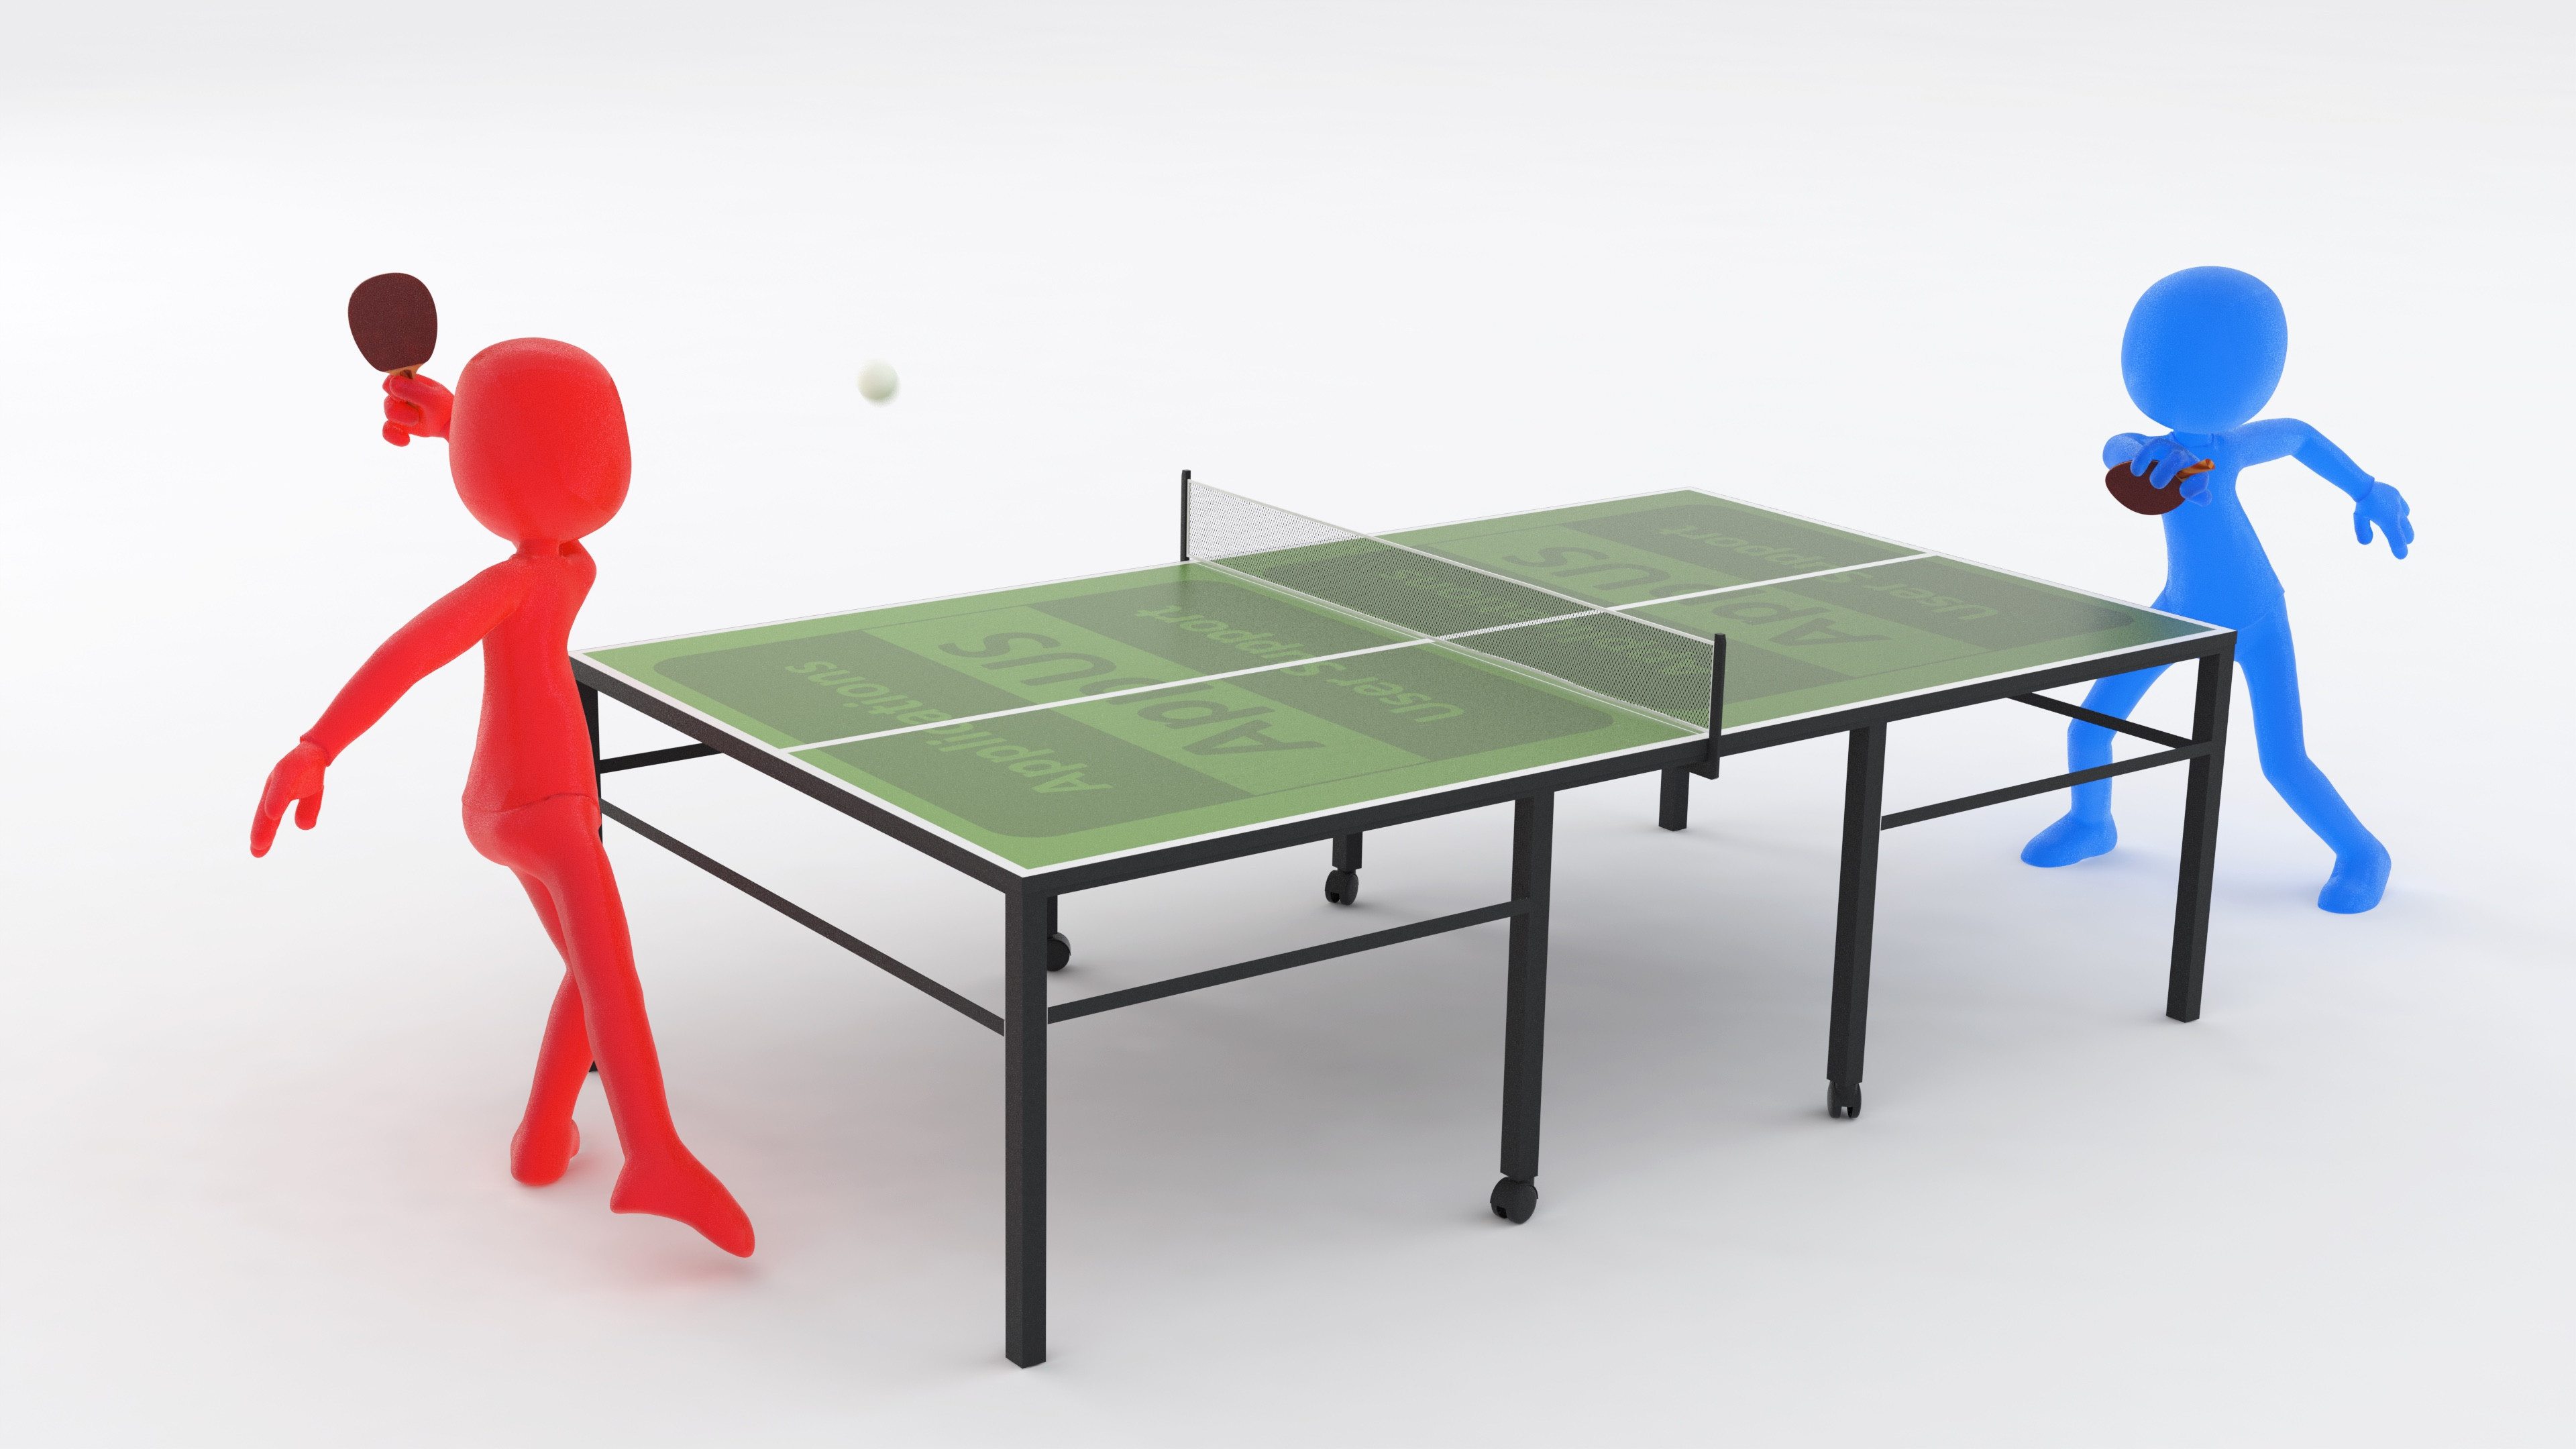 Blue gummy brand mascot and a red analogue using the client’s table tennis facility - this image done as a moral effort for staff...